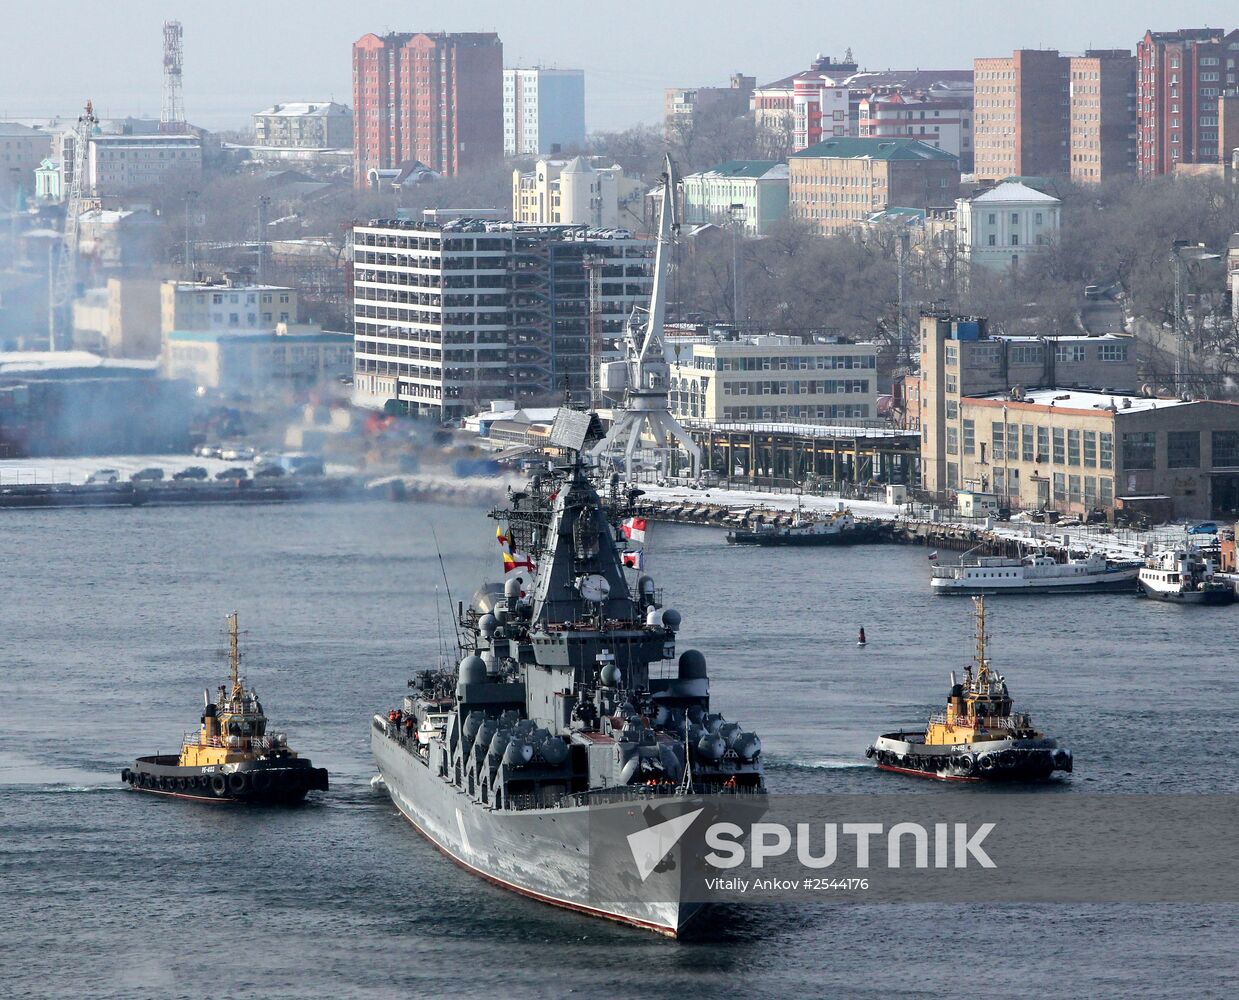 Guided missile cruiser "Varyag" receives a ceremonial welcome